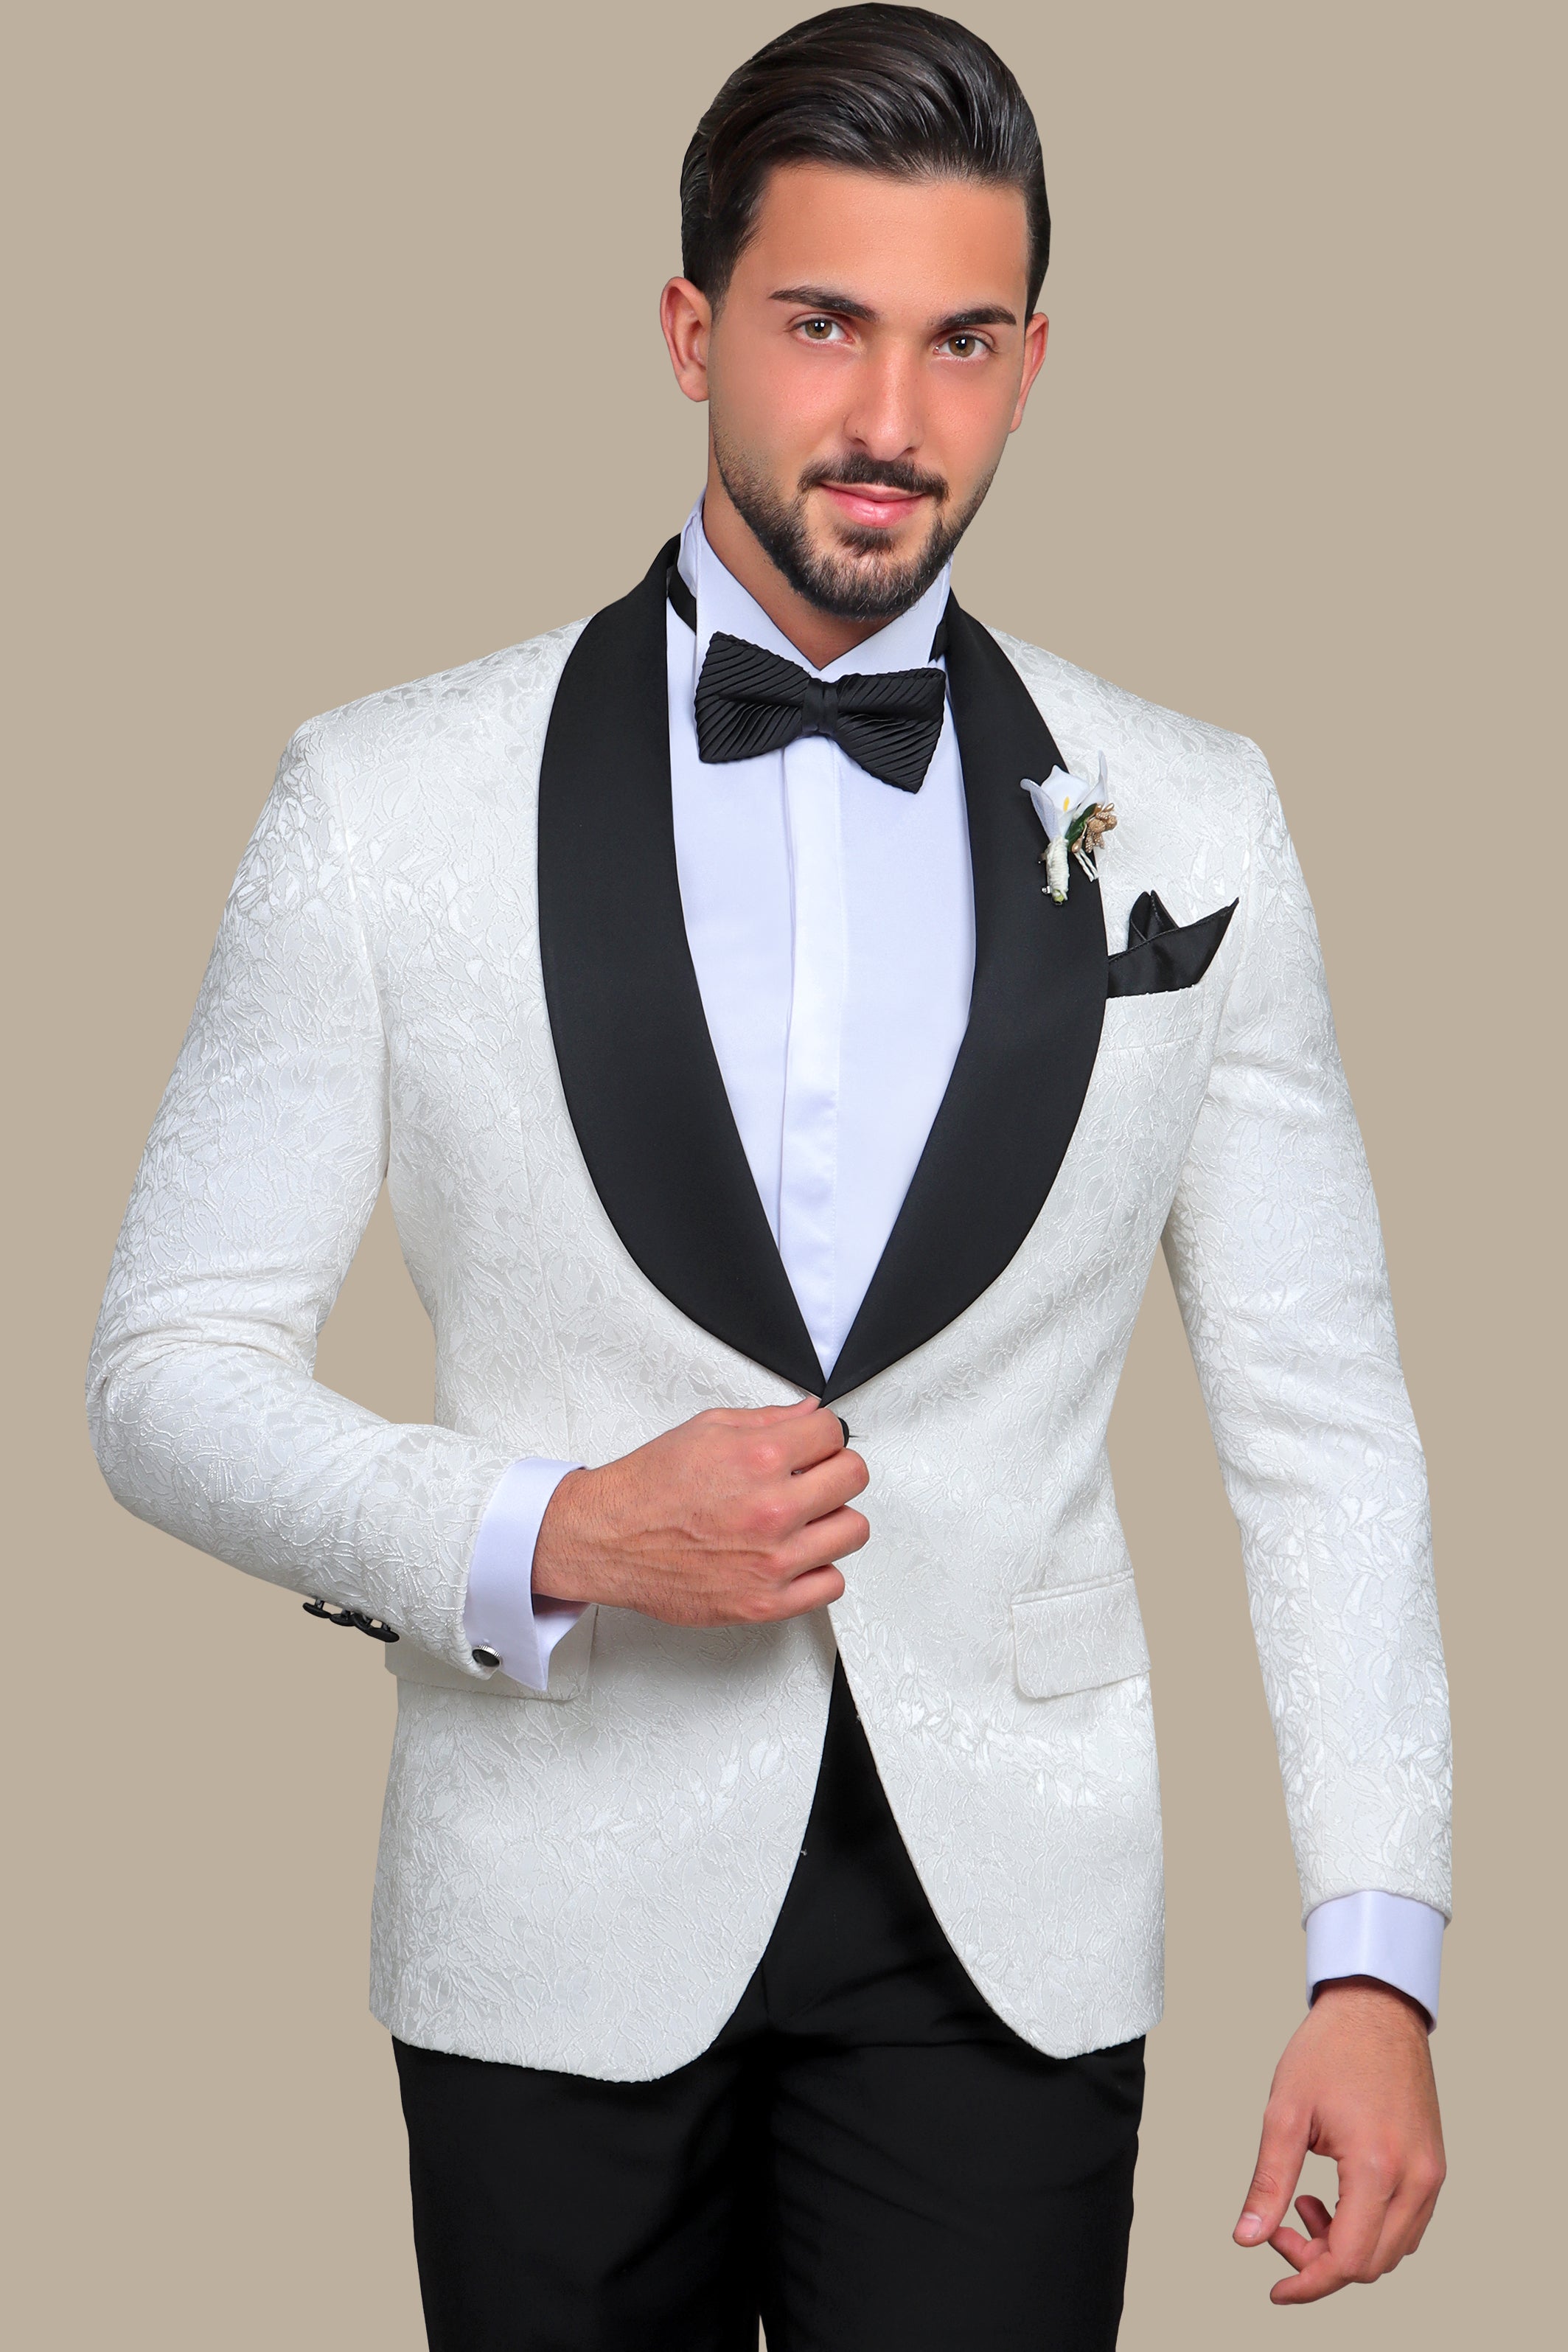 Snowfall Elegance: FV Printed Leaves Jacquard Tuxedo with Wide Shawl Collar in White